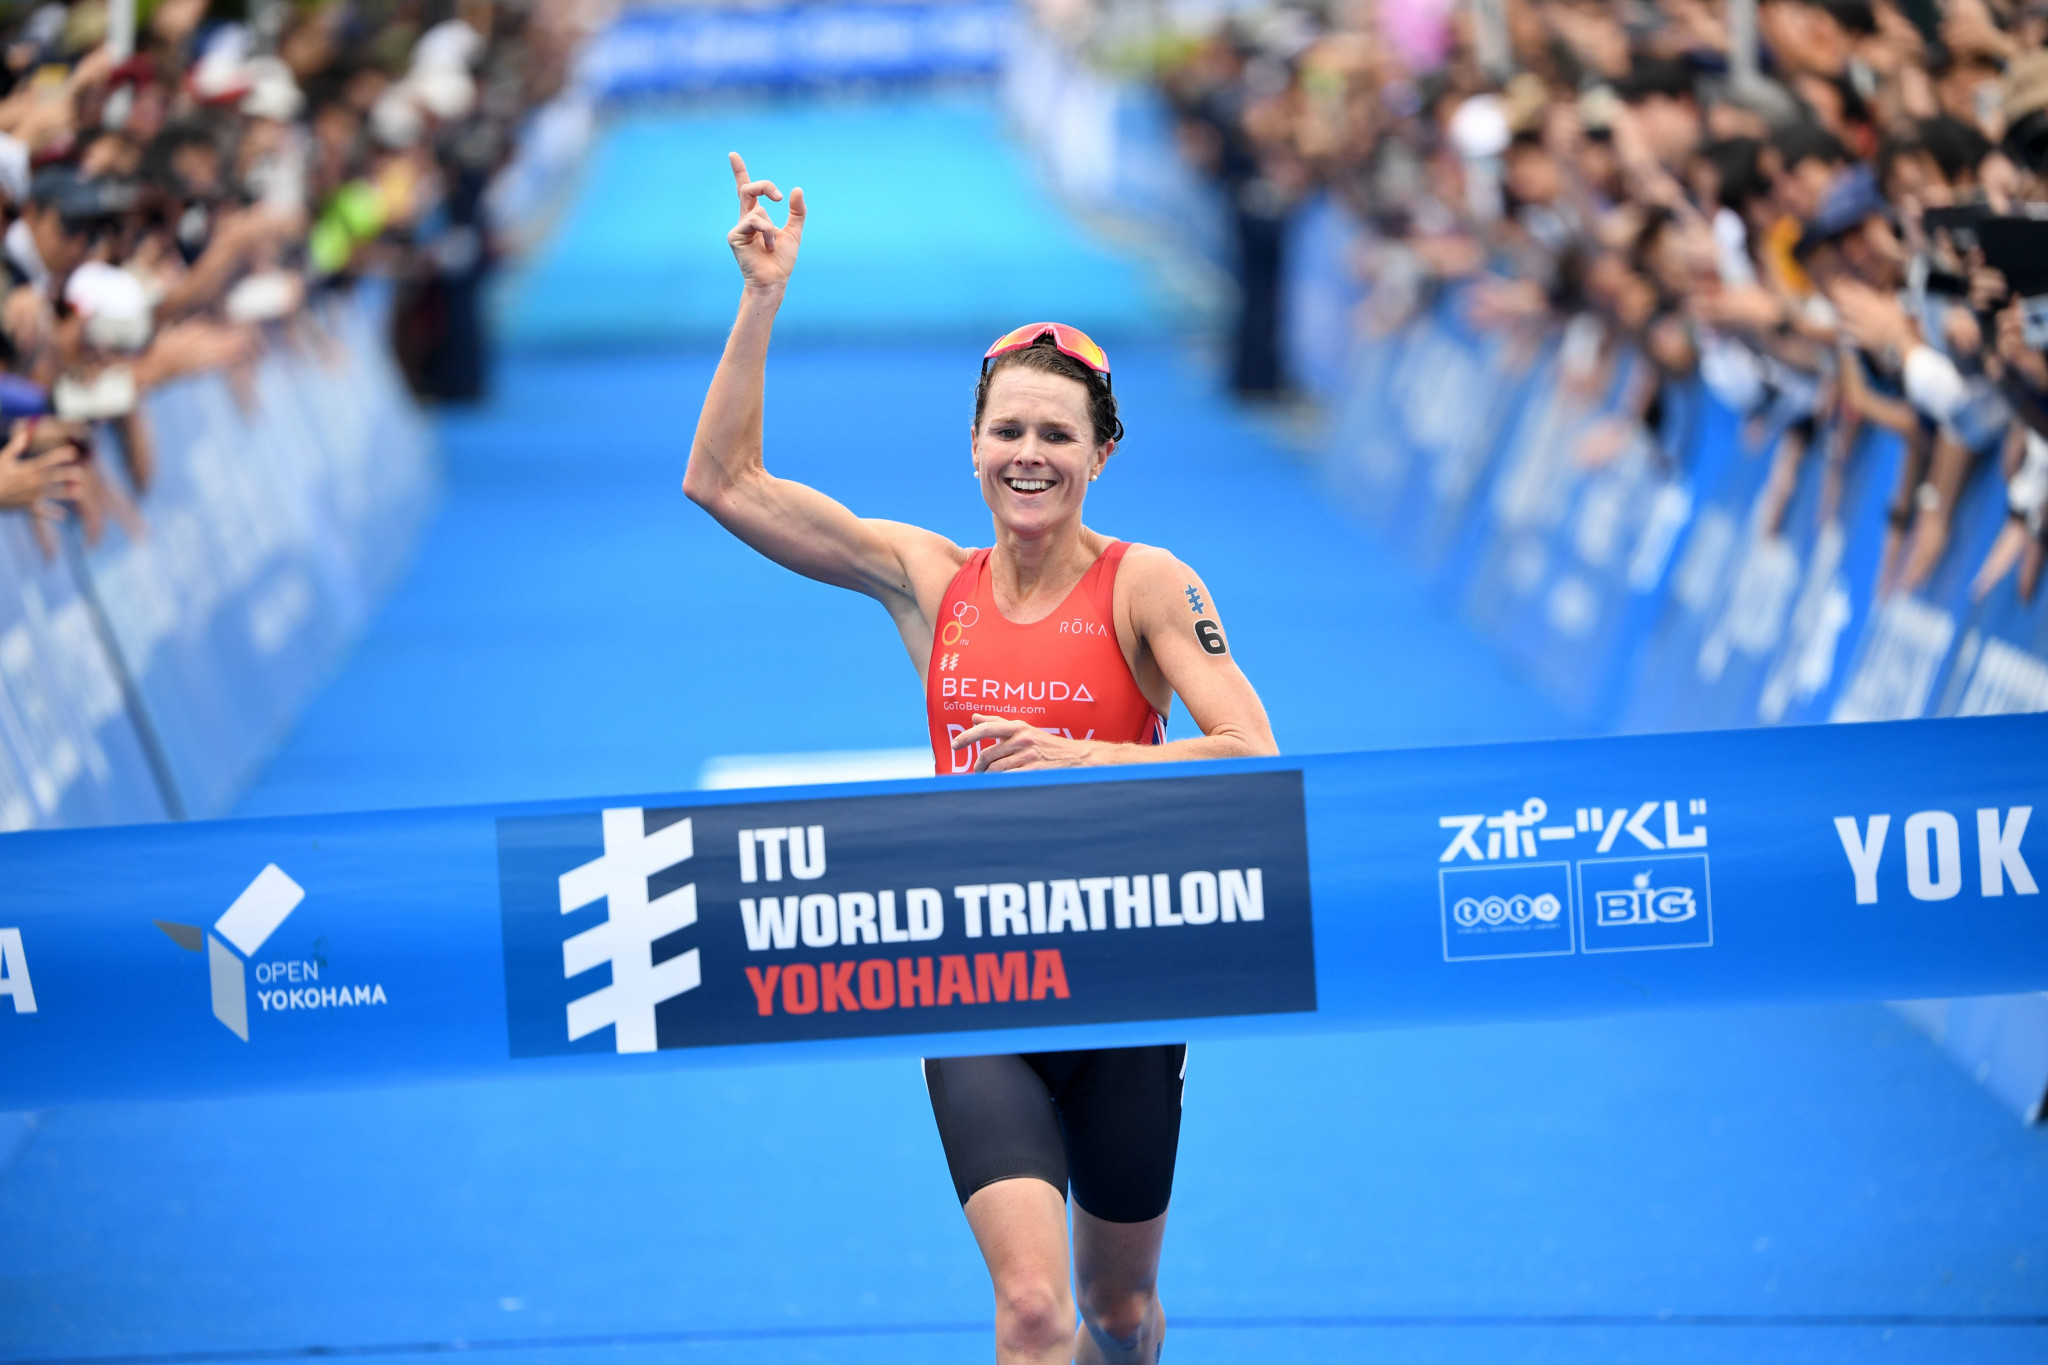 Flora Duffy continued her dominant form in the women's race ©ITU